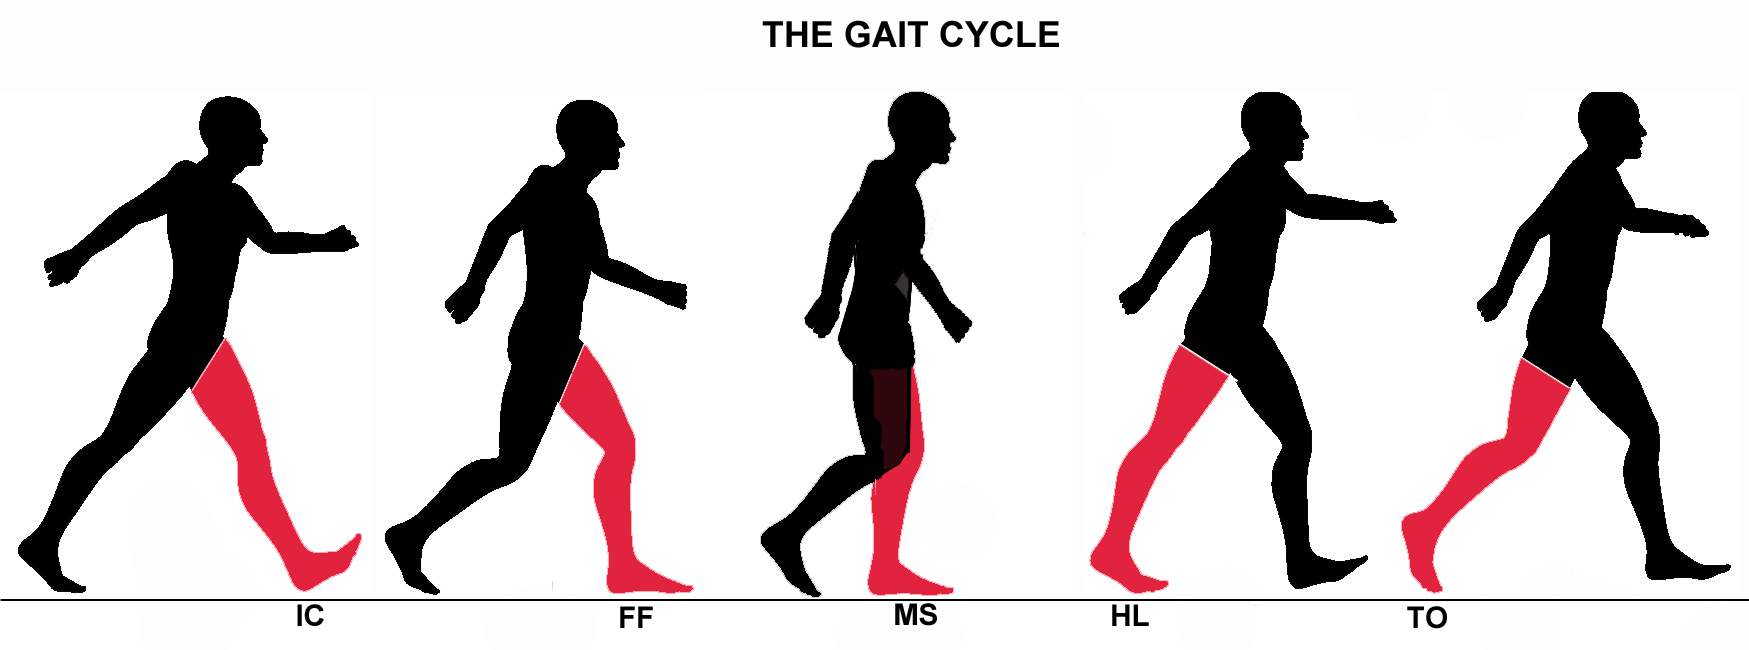 Timing of single and double support during one gait cycle.